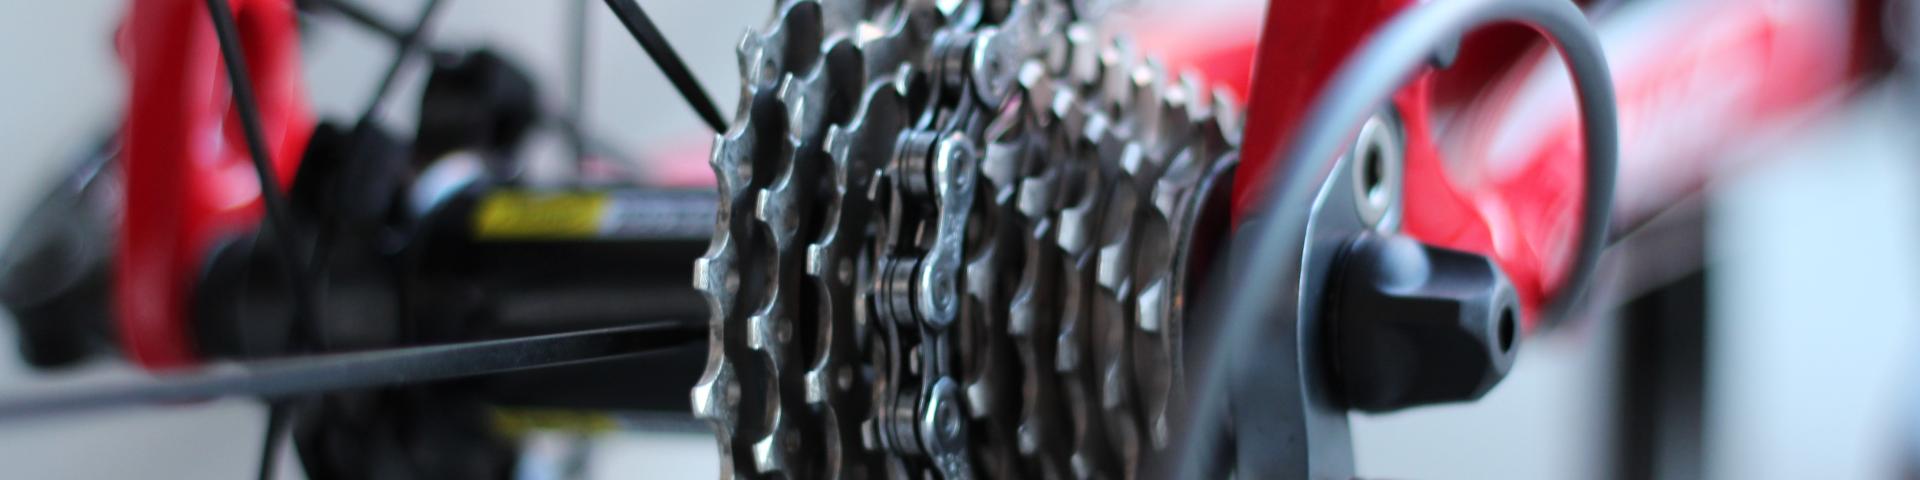 Red Bicycle chains close up  